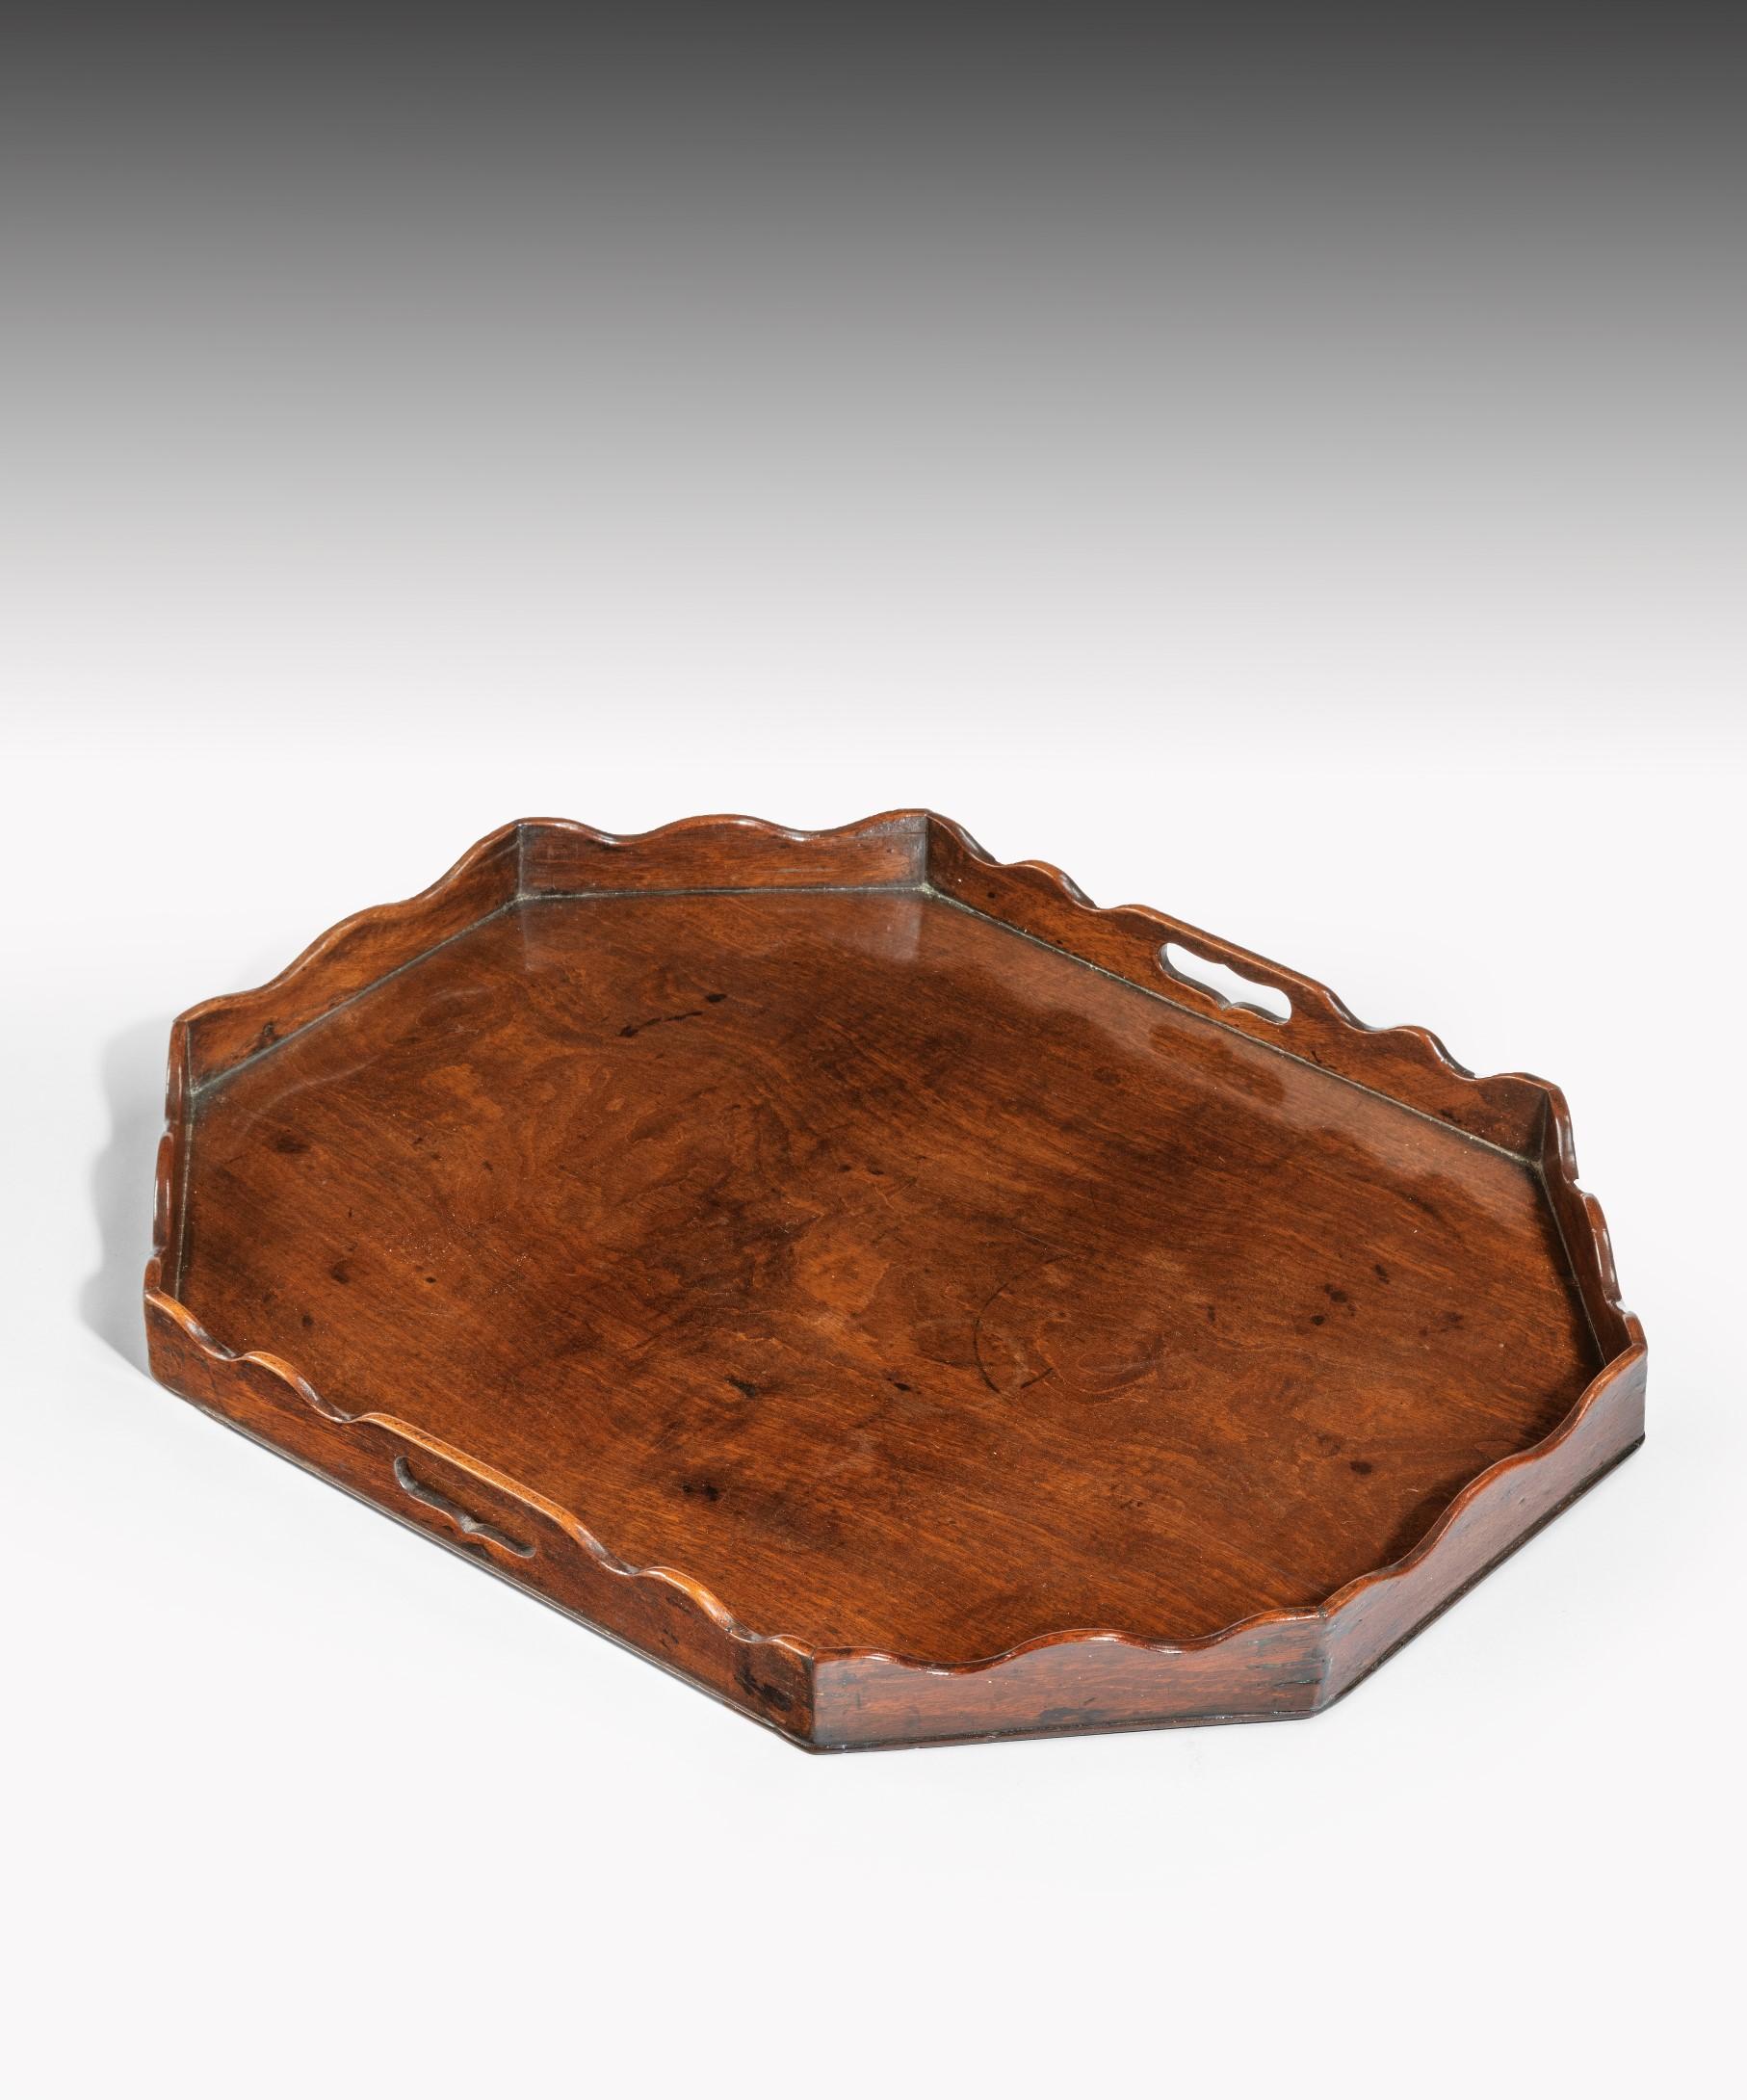 A Georgian mahogany tray; the tray is constructed from well figured mahogany with a shaped gallery pierced with two carrying handles. Retaining an excellent color and patination.